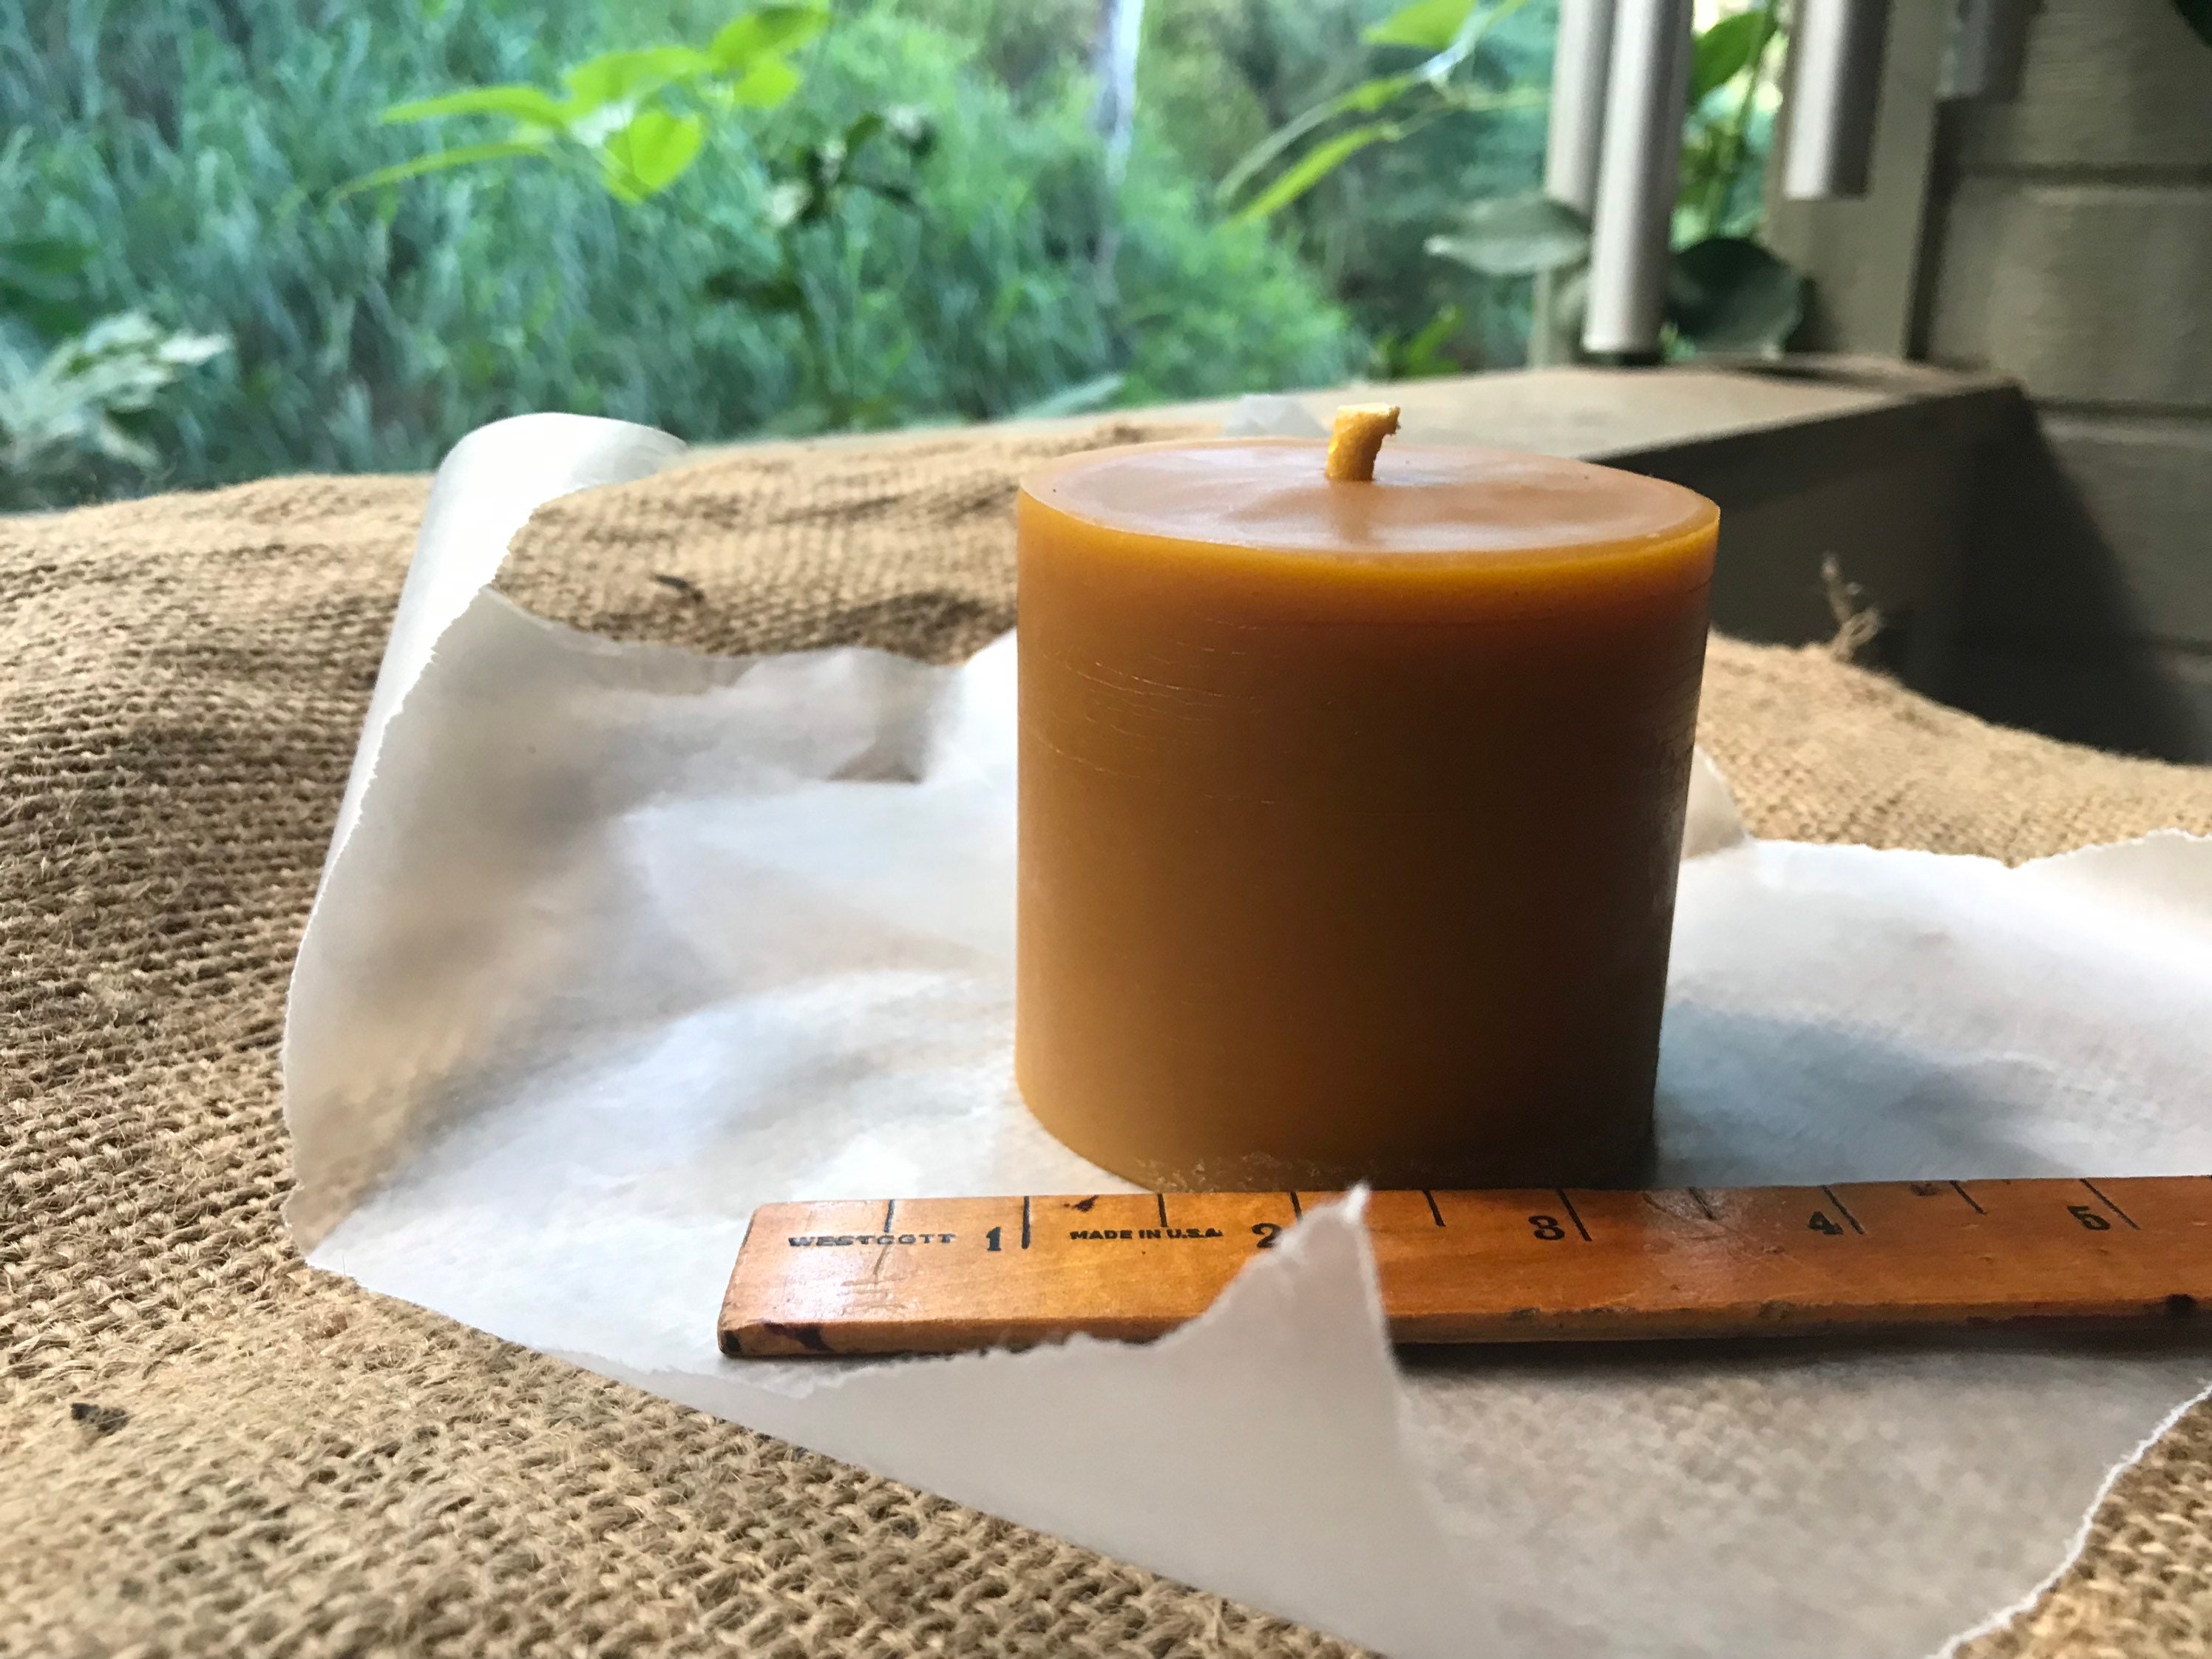  100pcs/6in Beeswax Candle Wicks,Hemp Candle Wick,Slow Burning  Candle Wick,Pre-Waxed Hemp Wick for Candle Making(2mm Diameter)